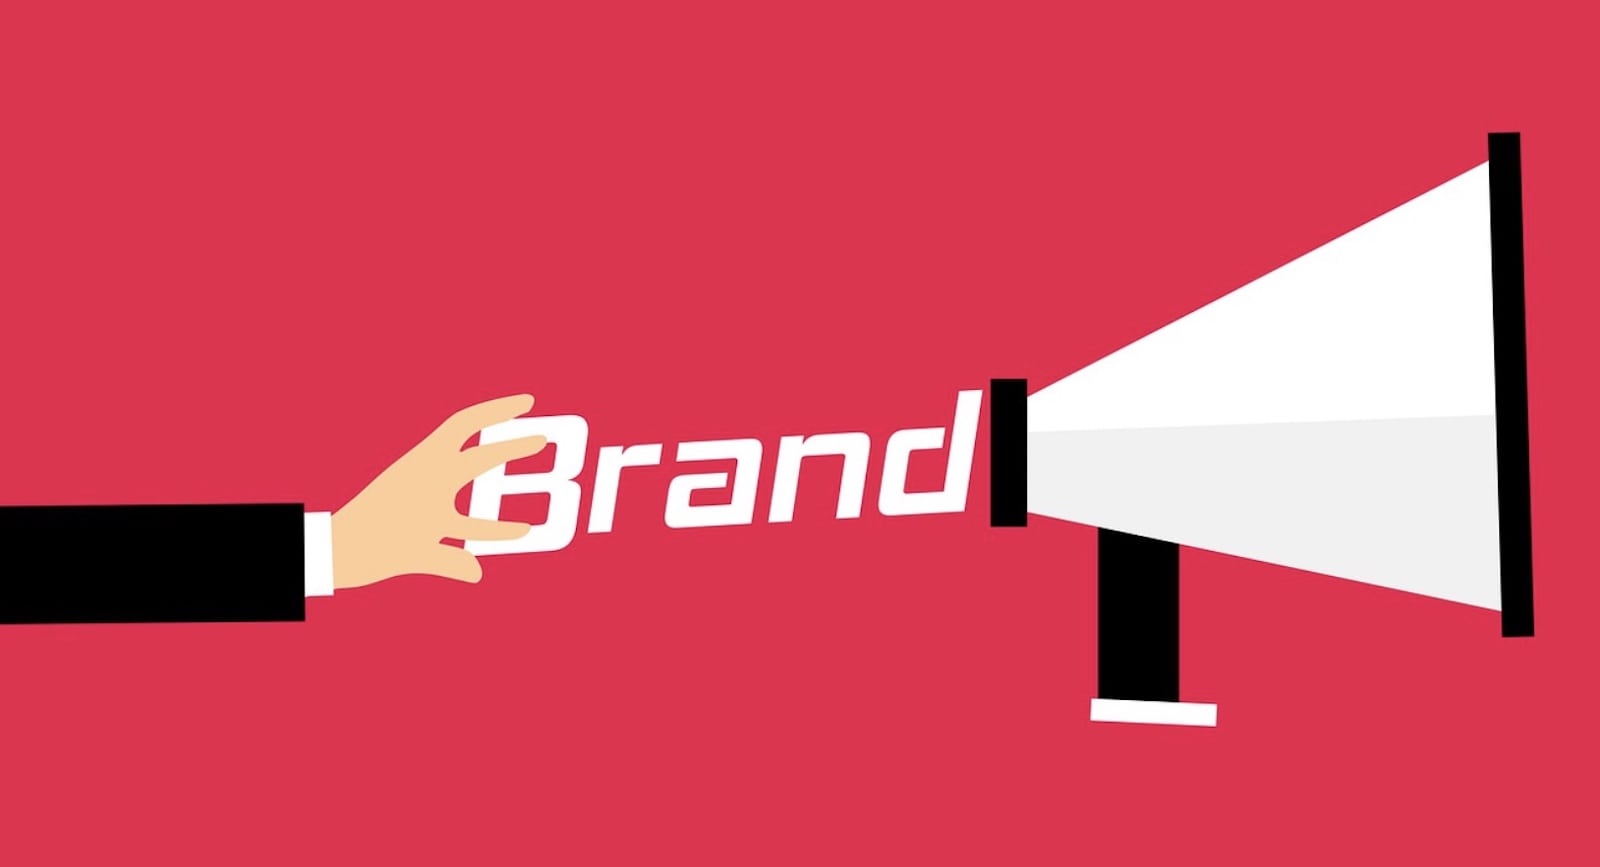 A strong brand identity is like a bullhorn for your business